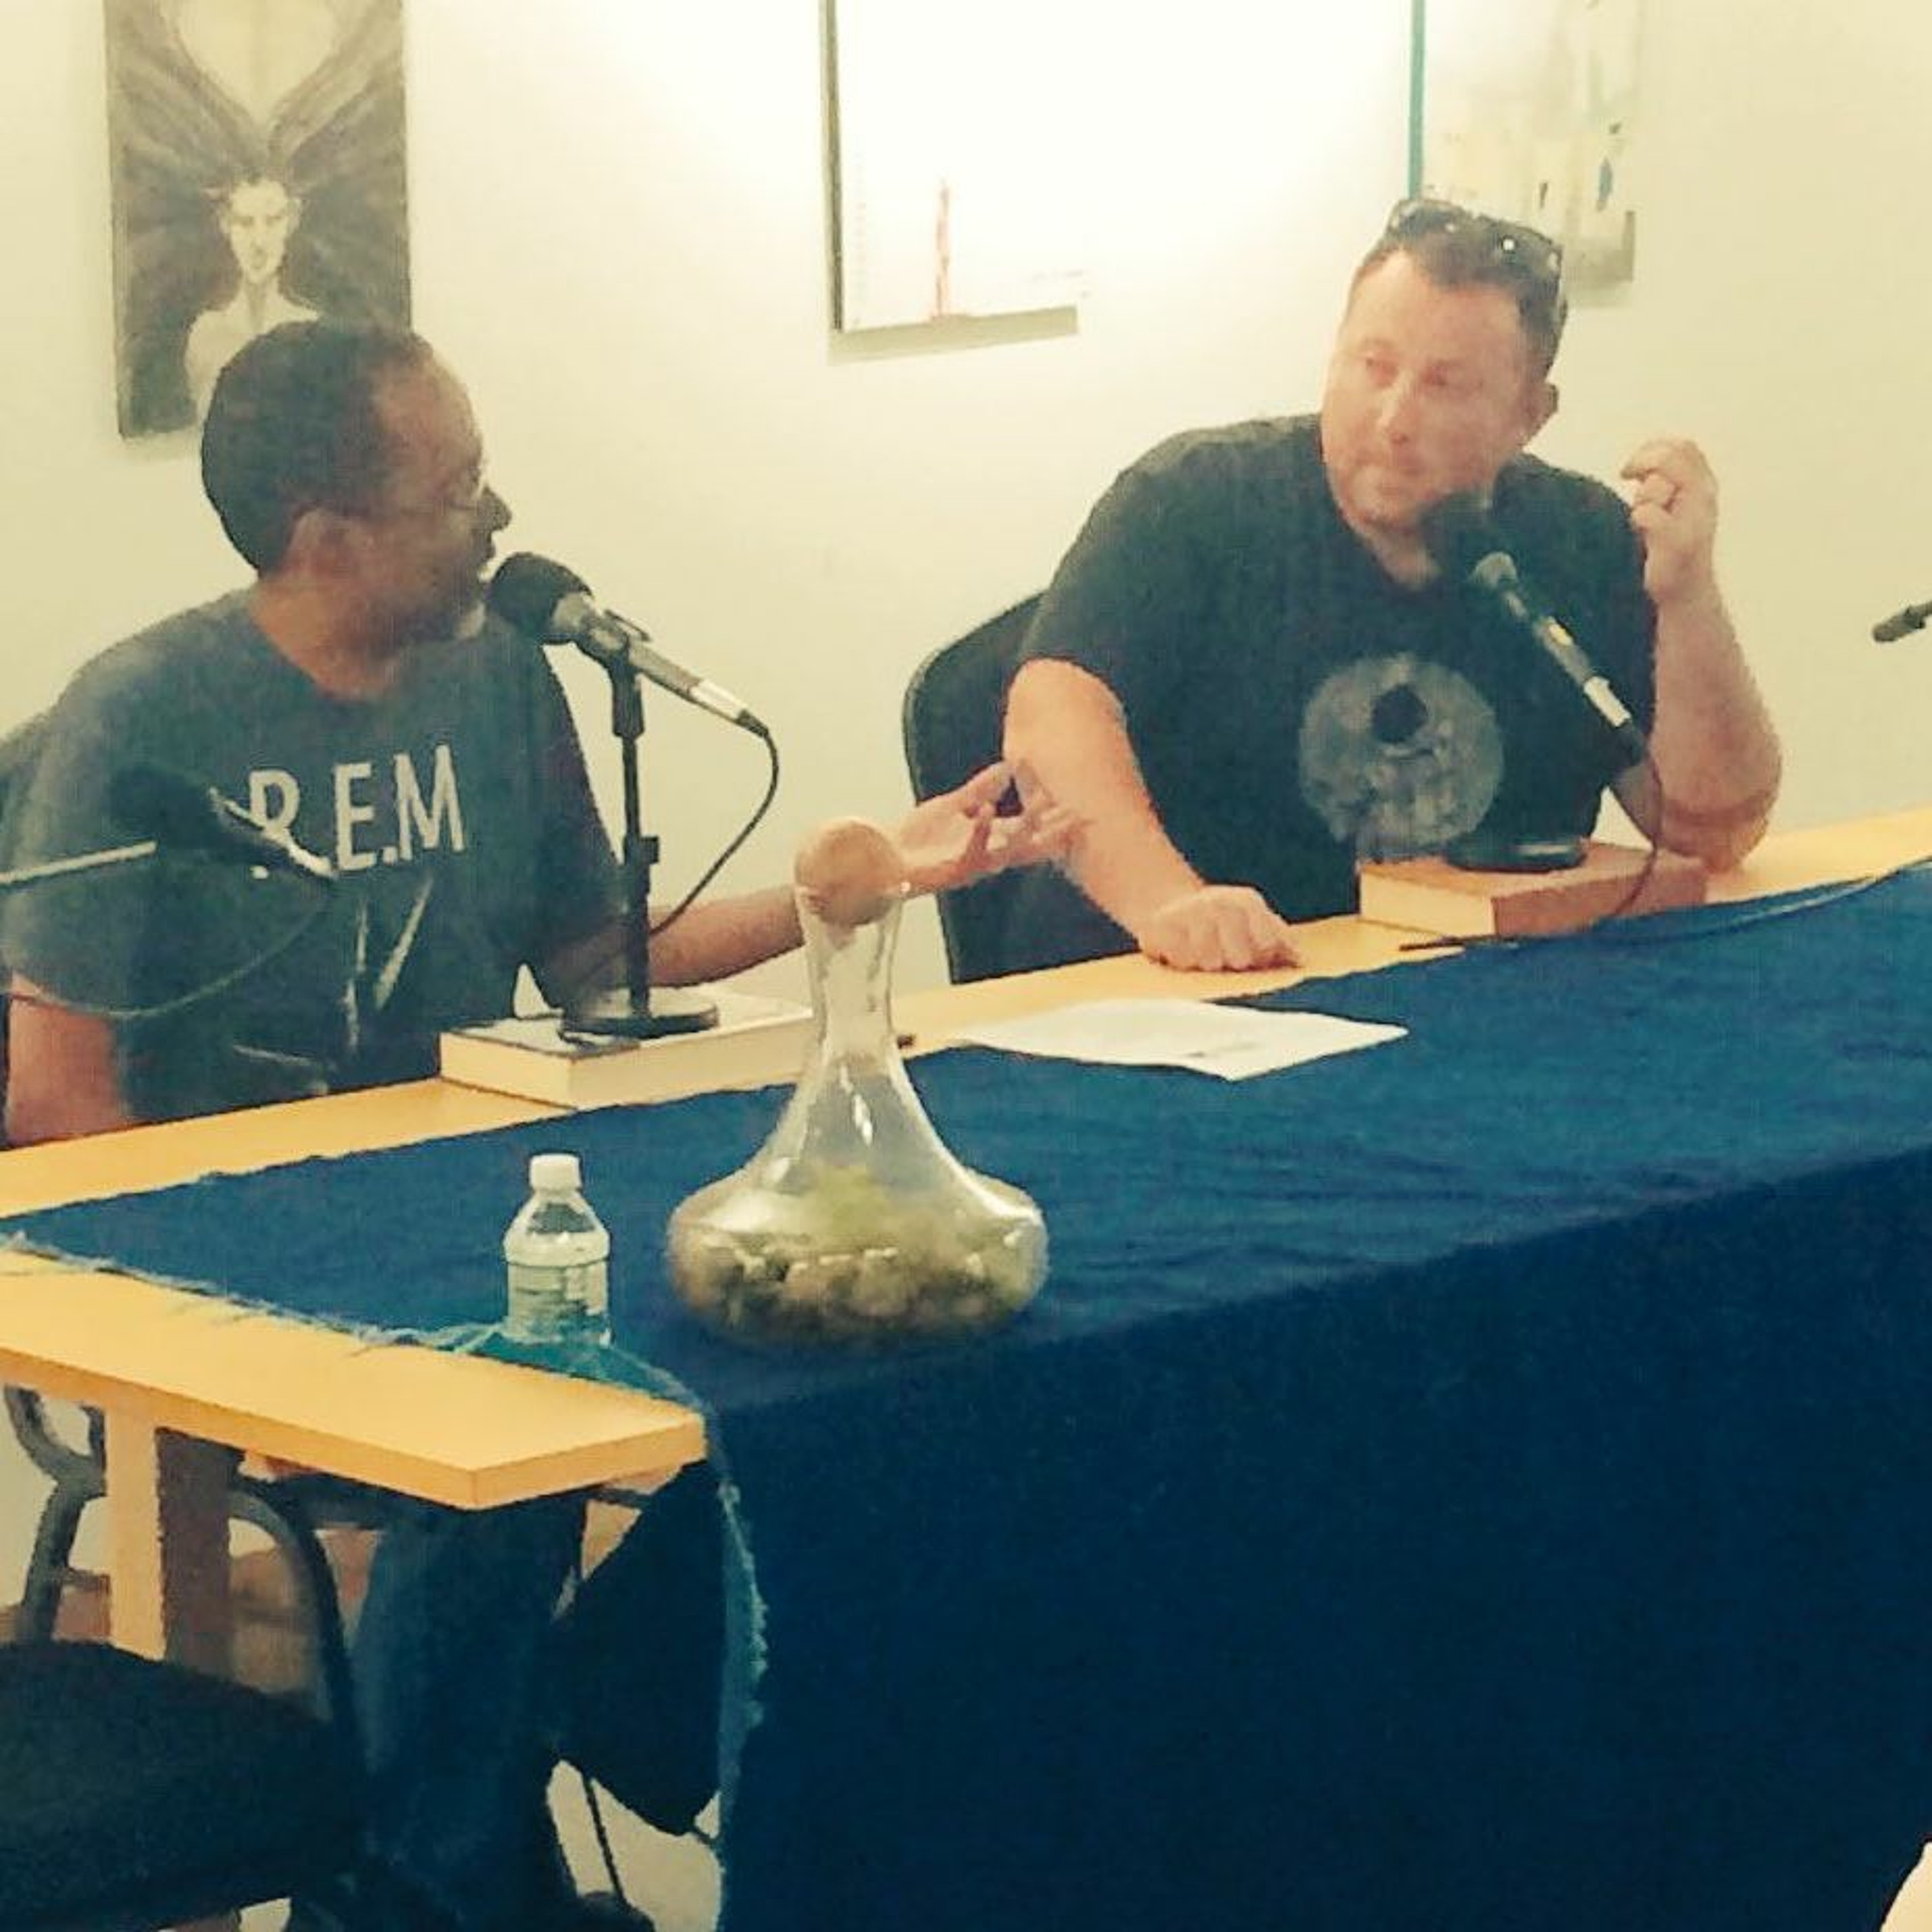 Avoiding Bias in Community with Alex Hillman: Live from PhillyPodFest